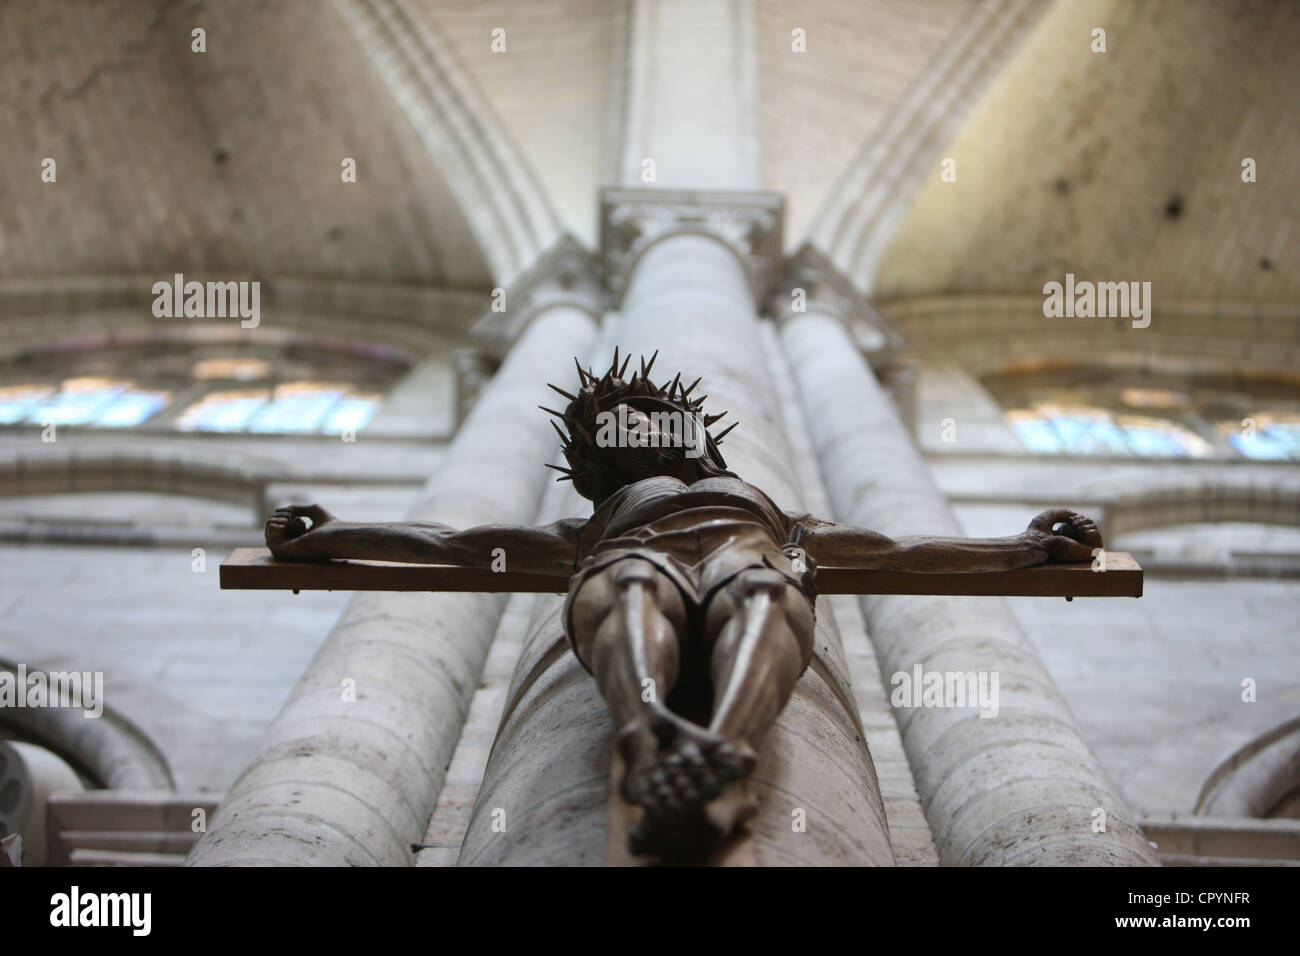 Crucifix, St. Stephen's Cathedral, Sens, Yonne, Burgundy, France, Europe Stock Photo